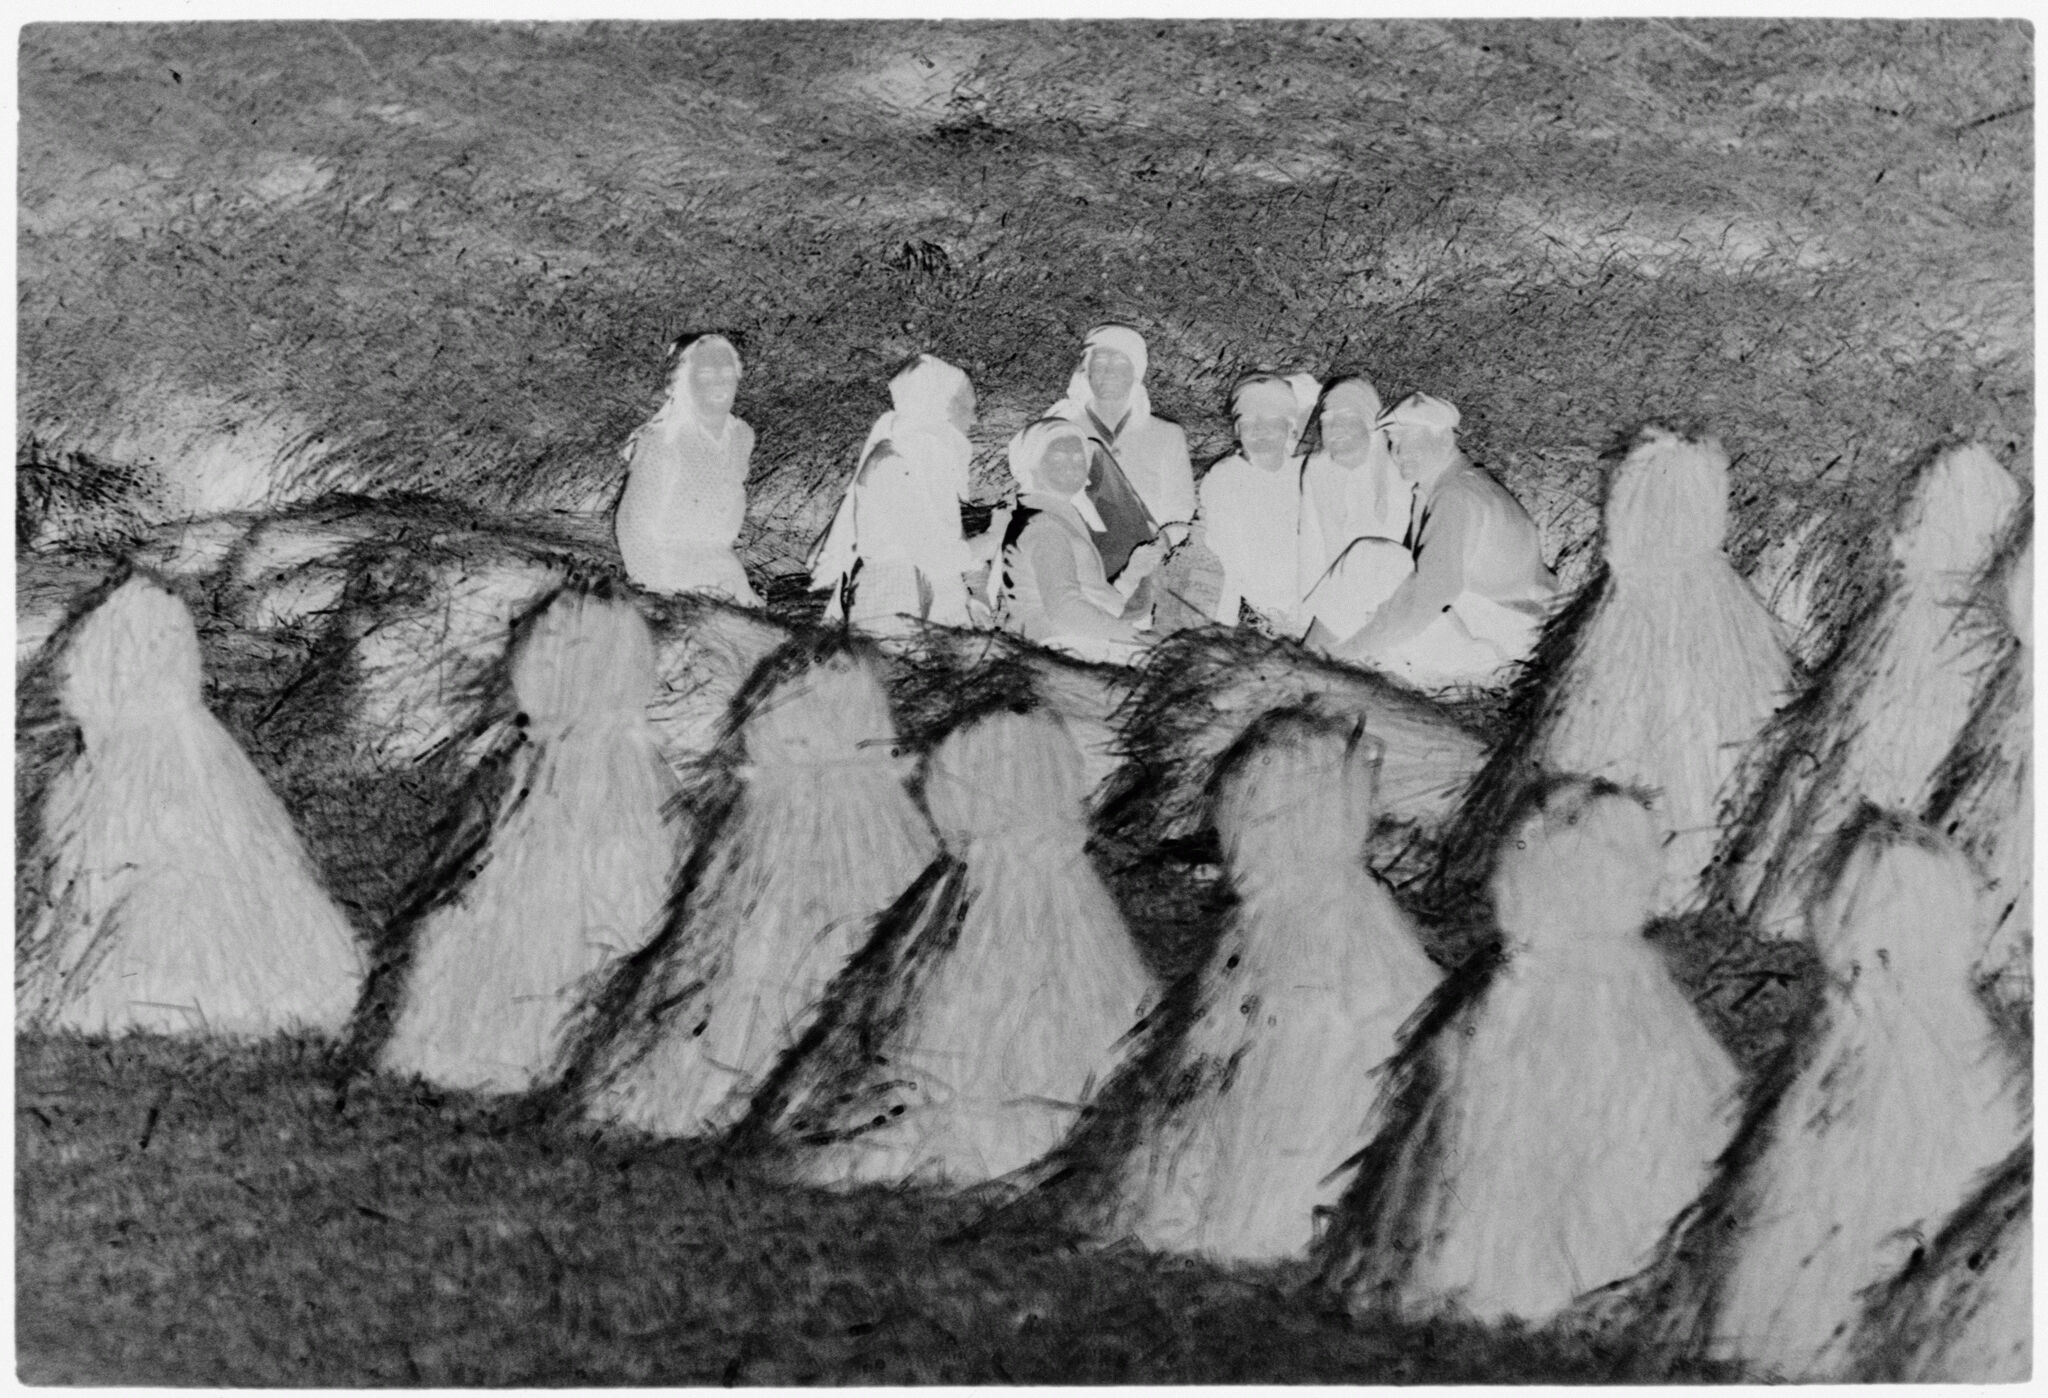 Untitled (Group Of Women Sitting By Rows Of Haystacks, Nazaré, Portugal)